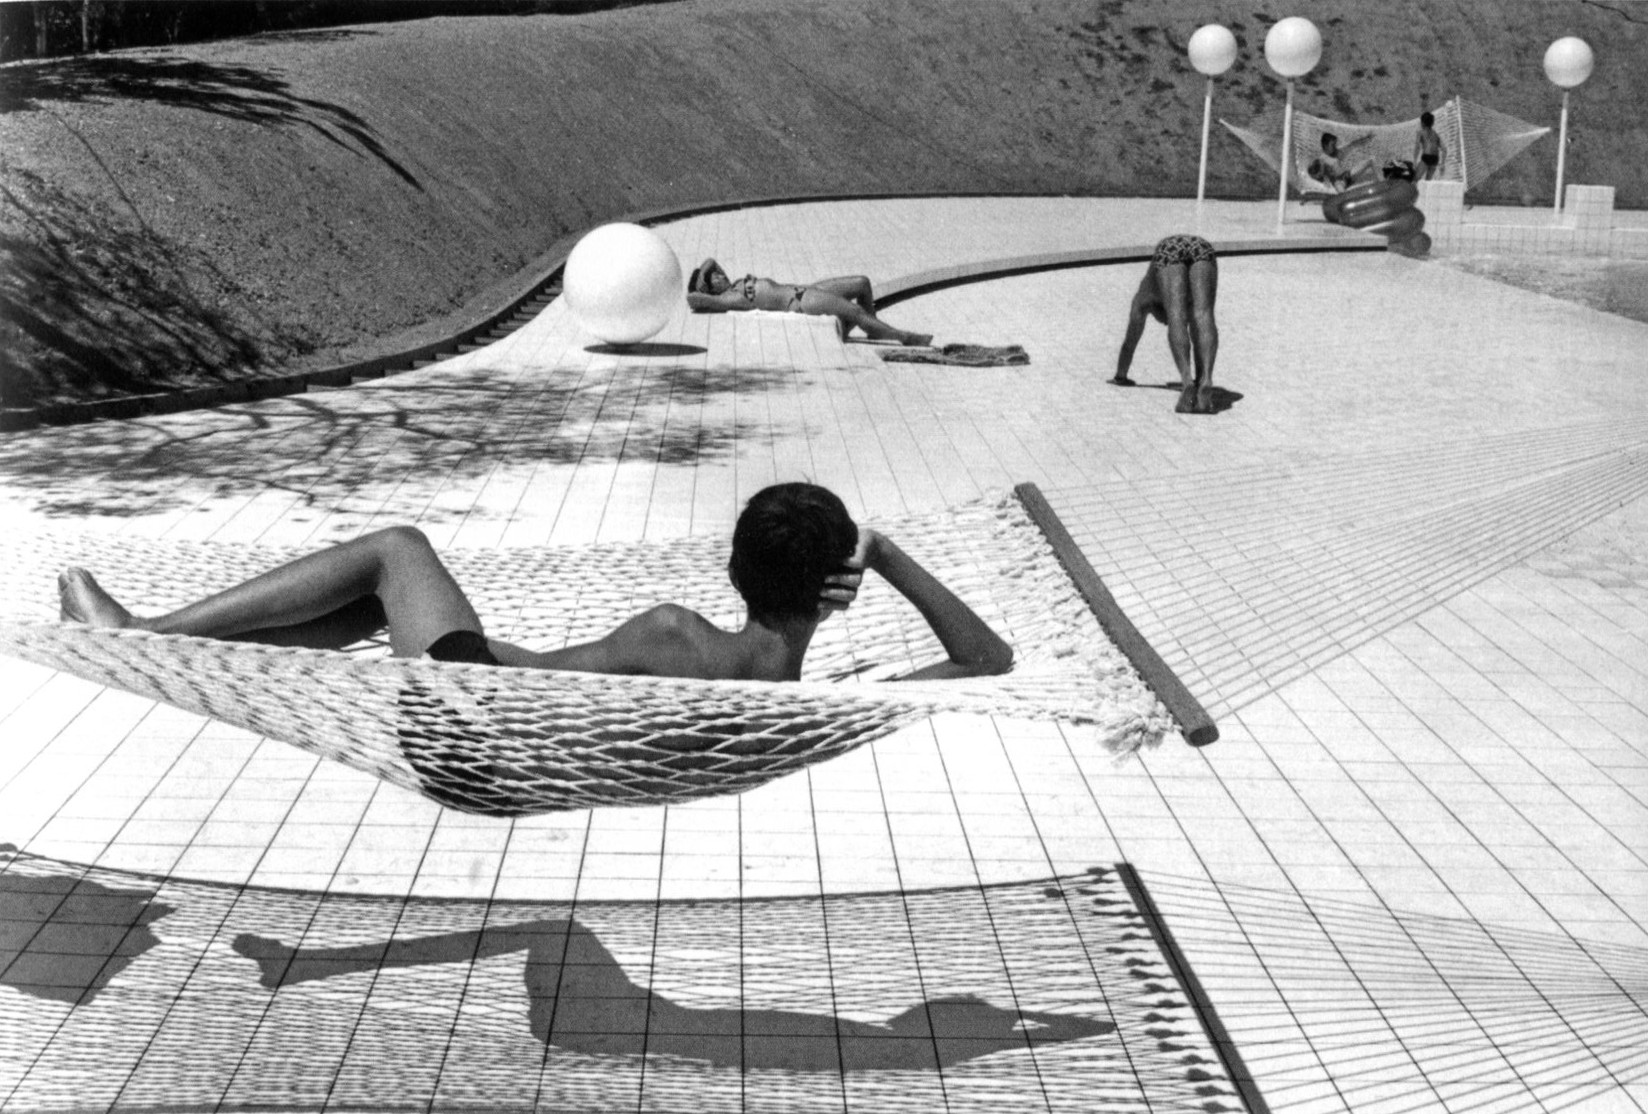 Martine Franck, Pool designed by Alain Capeilleres, Le Brusc, Provence, Frankreich, 1976